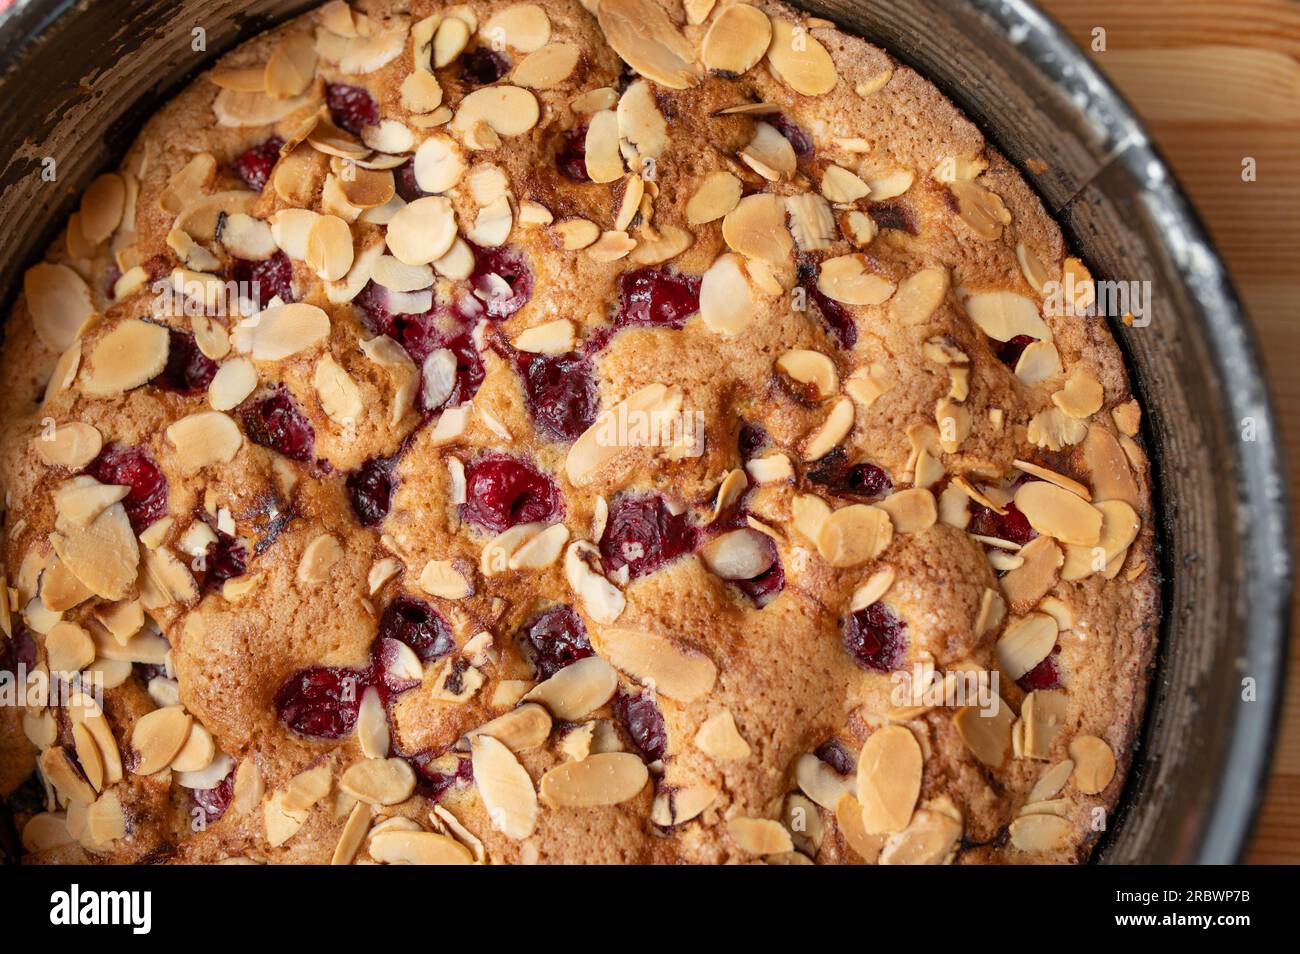 Homemade cherry pie with almonds in a round baking pan on wooden table Stock Photo